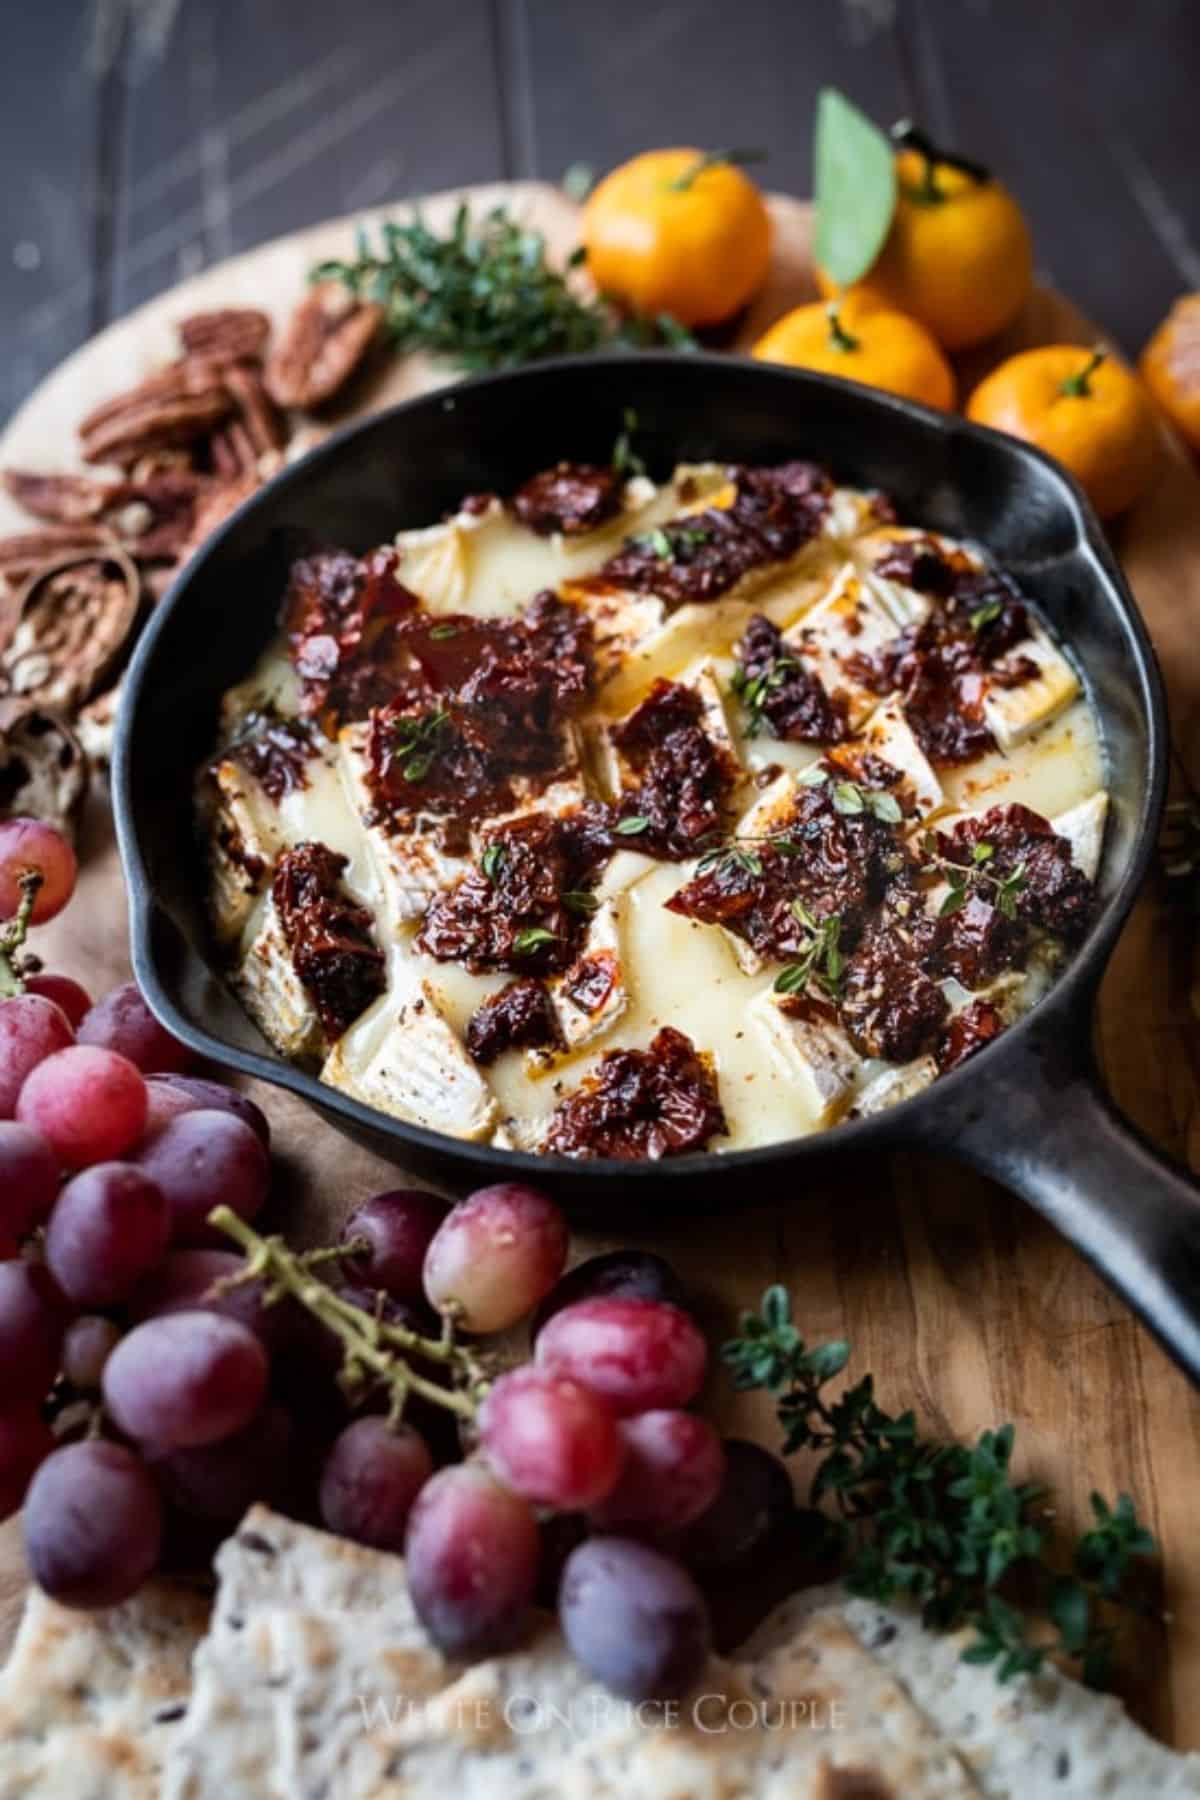 Delicious Baked Brie with Sun-dried Tomatoes in a black skillet.